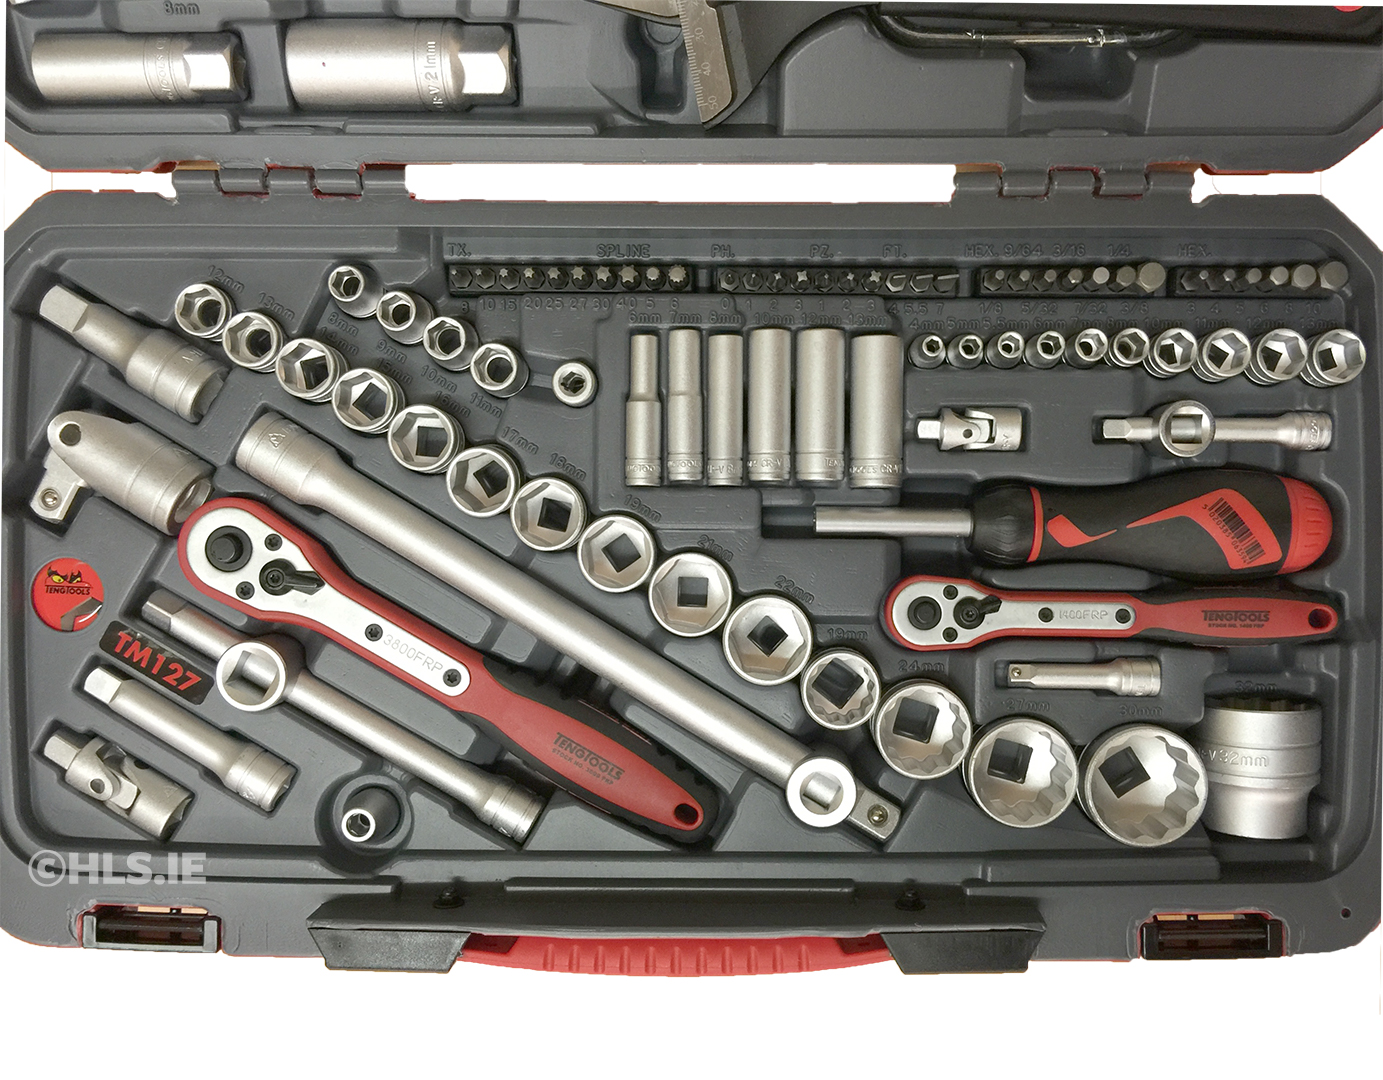 Teng Tools 127 Piece 1/4",3/8" and 1/2" Drive Tool Kit with Spanner Set TM127